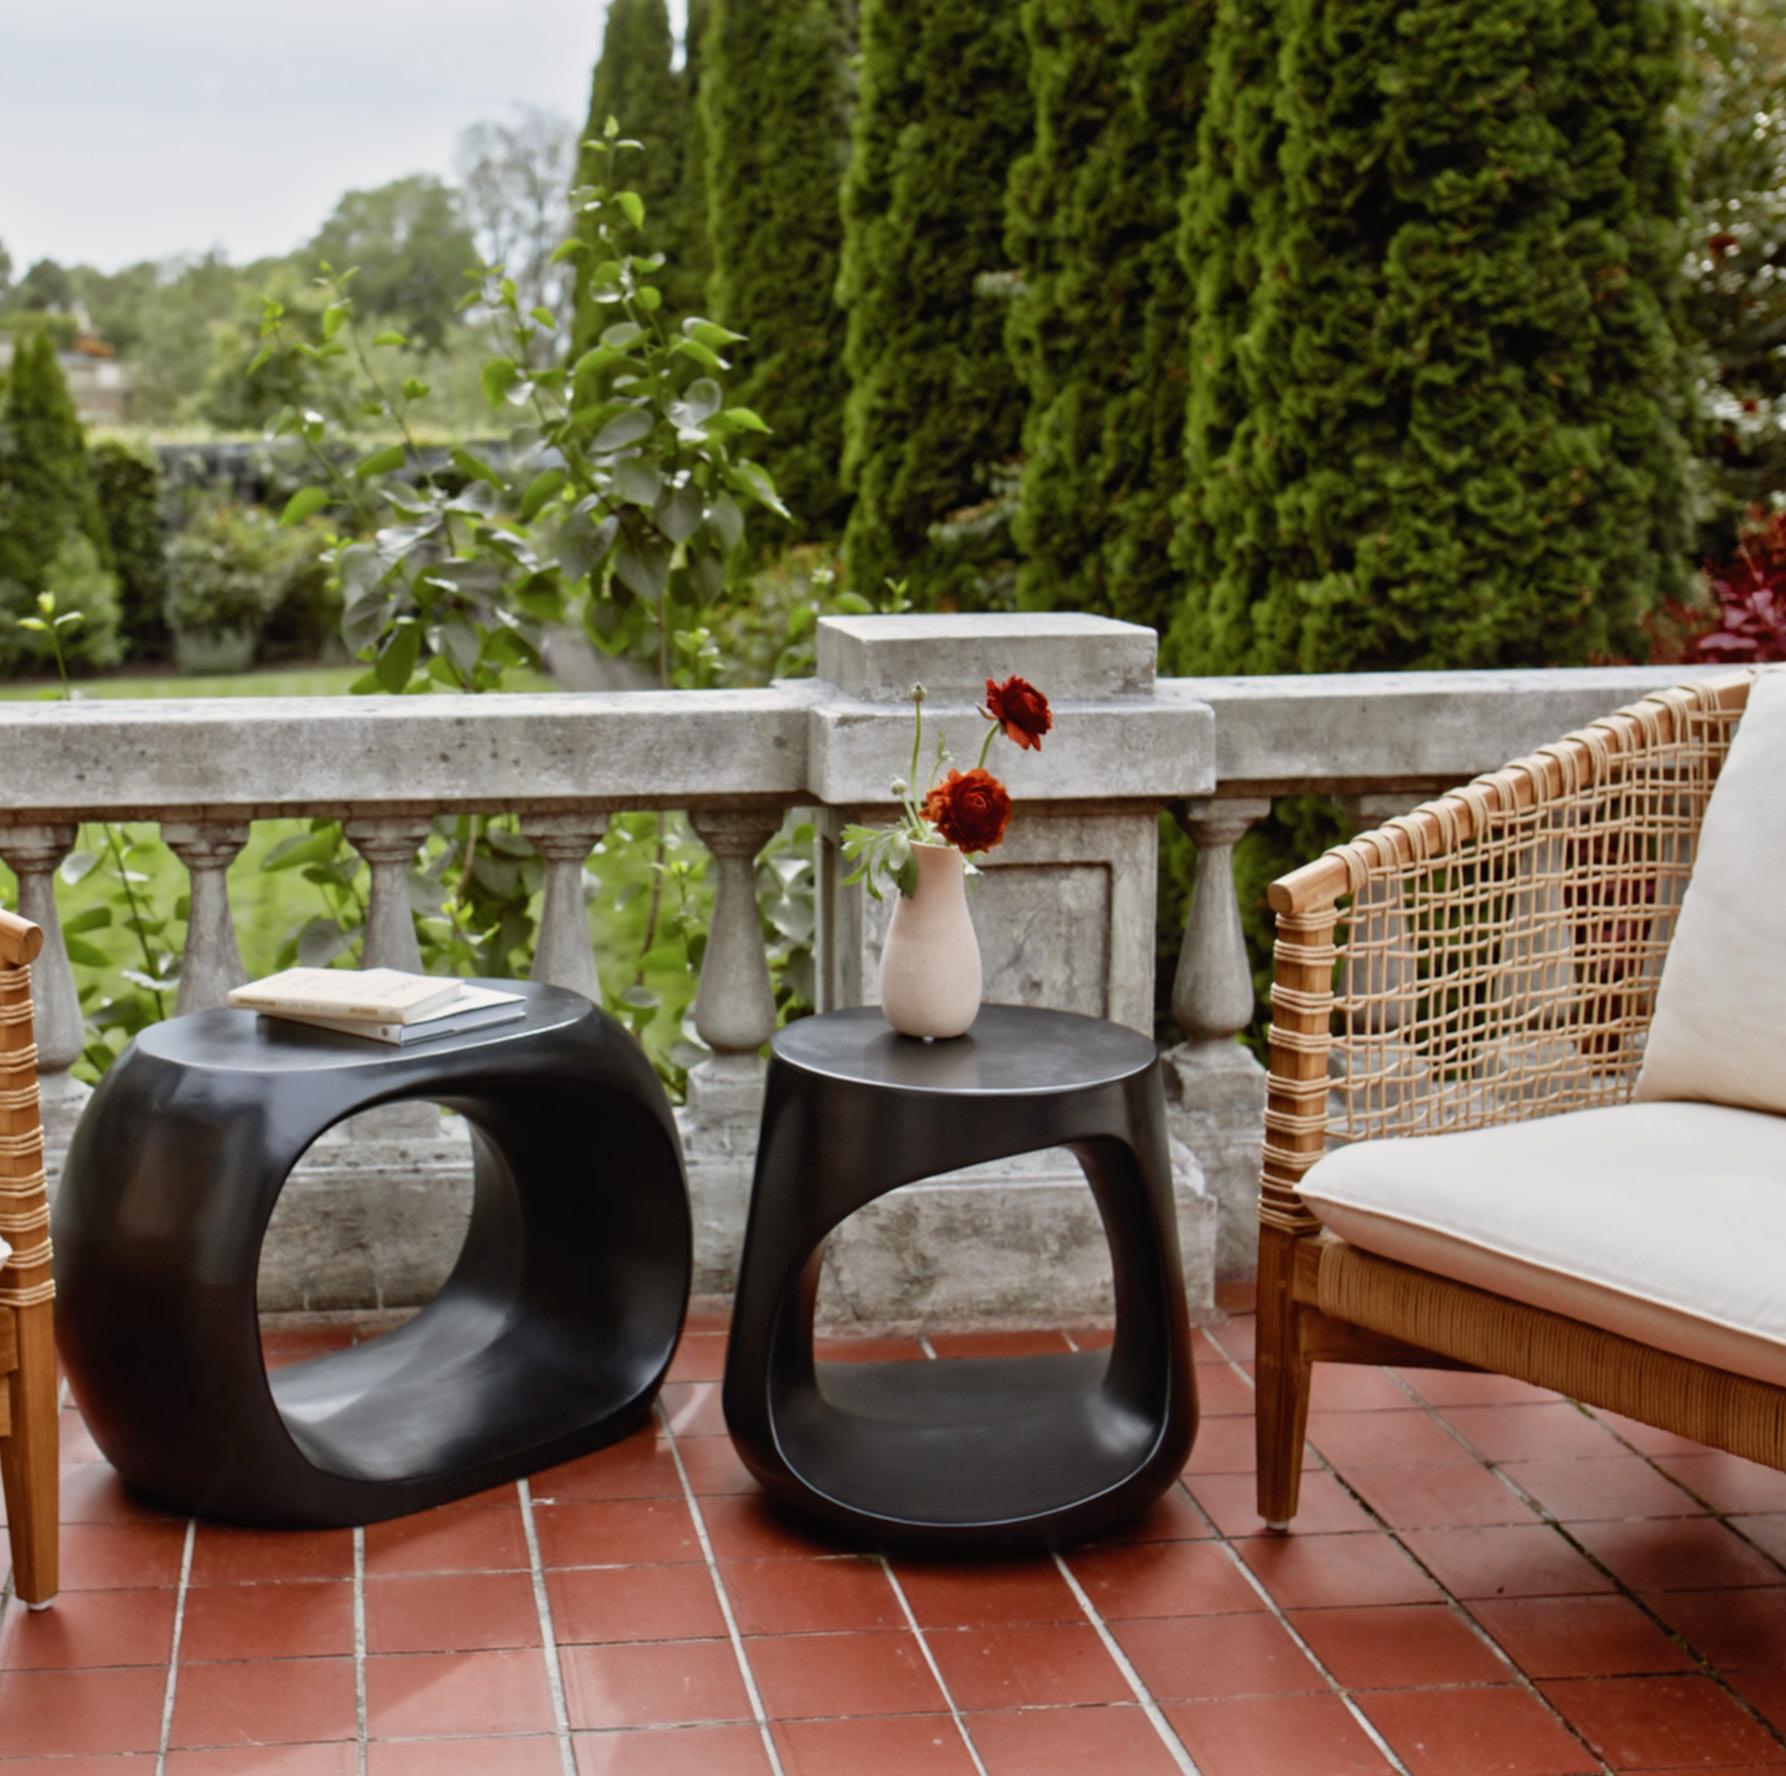 By buying an Albers Outdoor Stool, your yard will become more modern, stylish and comfortable